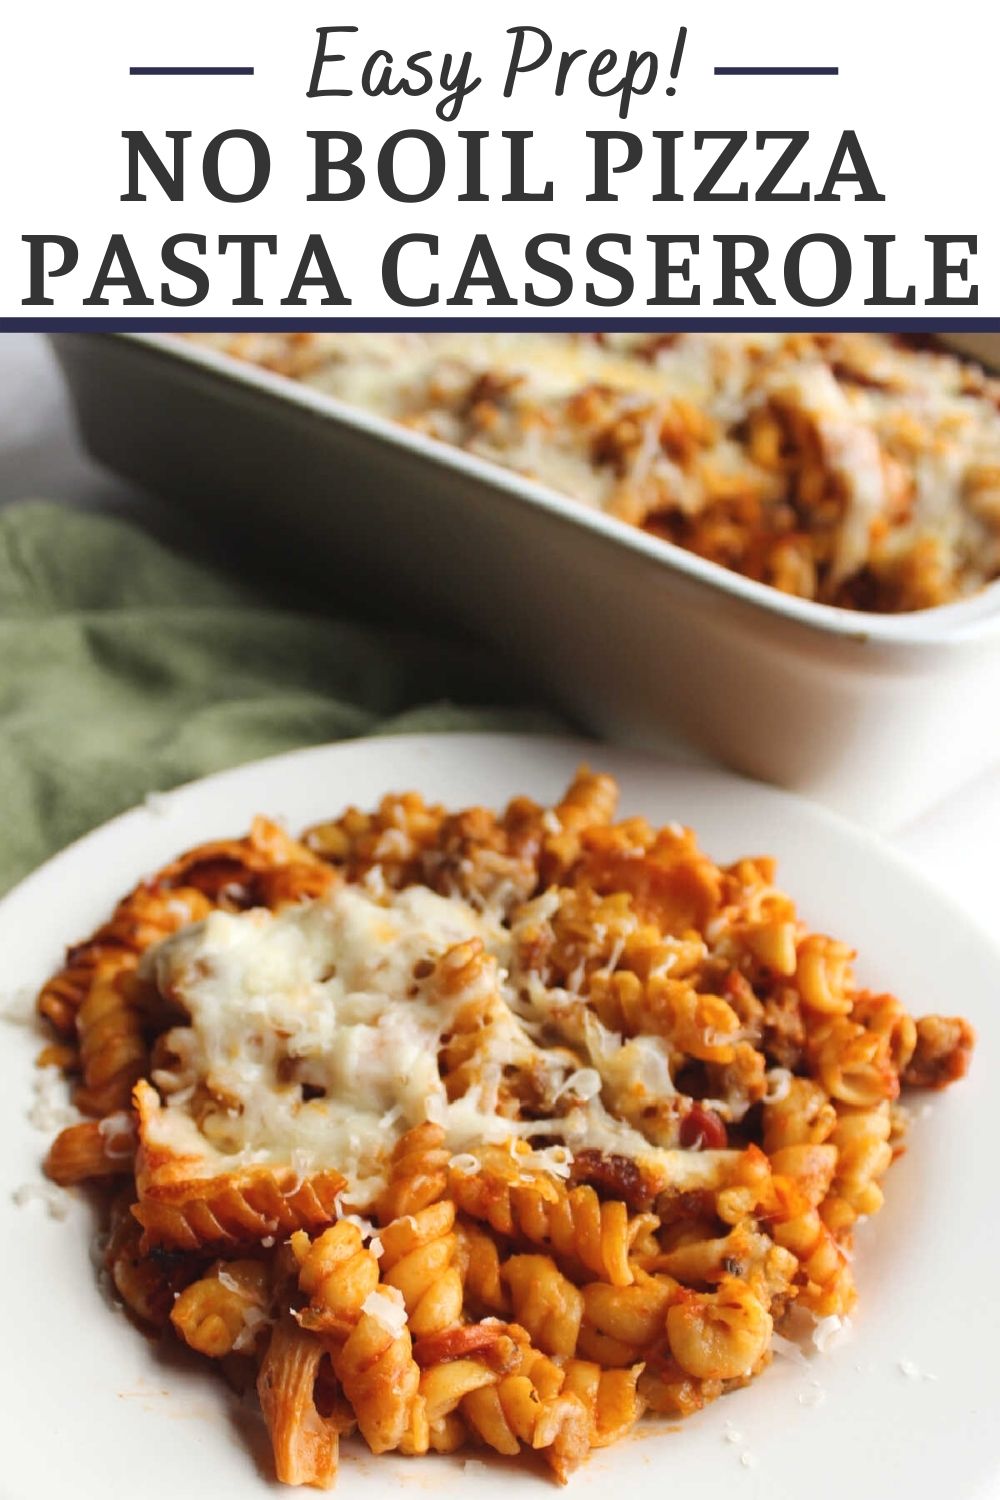 No boil pizza pasta casserole combines all of your favorite pizza toppings with the comfort of baked pasta. The best part is you don't even have to boil the noodles first, so assembly is quick and easy.